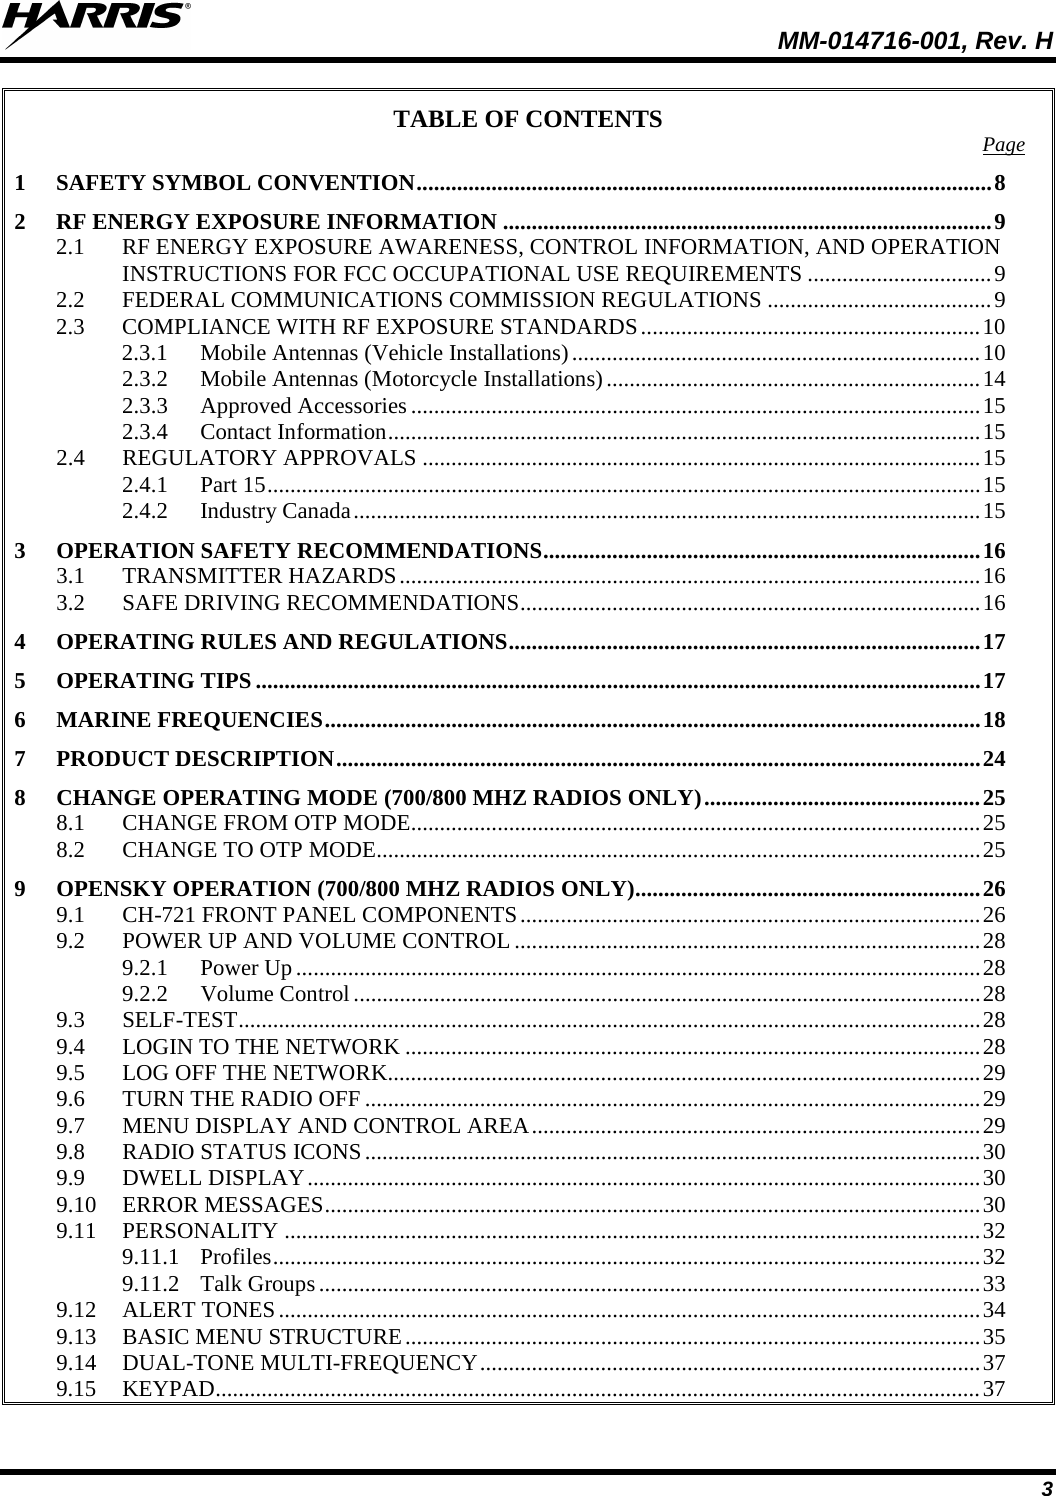  MM-014716-001, Rev. H 3 TABLE OF CONTENTS Page 1 SAFETY SYMBOL CONVENTION .................................................................................................... 8 2 RF ENERGY EXPOSURE INFORMATION ..................................................................................... 9 2.1 RF ENERGY EXPOSURE AWARENESS, CONTROL INFORMATION, AND OPERATION INSTRUCTIONS FOR FCC OCCUPATIONAL USE REQUIREMENTS ................................ 9 2.2 FEDERAL COMMUNICATIONS COMMISSION REGULATIONS ....................................... 9 2.3 COMPLIANCE WITH RF EXPOSURE STANDARDS ........................................................... 10 2.3.1 Mobile Antennas (Vehicle Installations) ....................................................................... 10 2.3.2 Mobile Antennas (Motorcycle Installations) ................................................................. 14 2.3.3 Approved Accessories ................................................................................................... 15 2.3.4 Contact Information ....................................................................................................... 15 2.4 REGULATORY APPROVALS ................................................................................................. 15 2.4.1 Part 15 ............................................................................................................................ 15 2.4.2 Industry Canada ............................................................................................................. 15 3 OPERATION SAFETY RECOMMENDATIONS ............................................................................ 16 3.1 TRANSMITTER HAZARDS ..................................................................................................... 16 3.2 SAFE DRIVING RECOMMENDATIONS ................................................................................ 16 4 OPERATING RULES AND REGULATIONS .................................................................................. 17 5 OPERATING TIPS .............................................................................................................................. 17 6 MARINE FREQUENCIES .................................................................................................................. 18 7 PRODUCT DESCRIPTION ................................................................................................................ 24 8 CHANGE OPERATING MODE (700/800 MHZ RADIOS ONLY) ................................................ 25 8.1 CHANGE FROM OTP MODE ................................................................................................... 25 8.2 CHANGE TO OTP MODE......................................................................................................... 25 9 OPENSKY OPERATION (700/800 MHZ RADIOS ONLY) ............................................................ 26 9.1 CH-721 FRONT PANEL COMPONENTS ................................................................................ 26 9.2 POWER UP AND VOLUME CONTROL ................................................................................. 28 9.2.1 Power Up ....................................................................................................................... 28 9.2.2 Volume Control ............................................................................................................. 28 9.3 SELF-TEST ................................................................................................................................. 28 9.4 LOGIN TO THE NETWORK .................................................................................................... 28 9.5 LOG OFF THE NETWORK....................................................................................................... 29 9.6 TURN THE RADIO OFF ........................................................................................................... 29 9.7 MENU DISPLAY AND CONTROL AREA .............................................................................. 29 9.8 RADIO STATUS ICONS ........................................................................................................... 30 9.9 DWELL DISPLAY ..................................................................................................................... 30 9.10 ERROR MESSAGES .................................................................................................................. 30 9.11 PERSONALITY ......................................................................................................................... 32 9.11.1 Profiles ........................................................................................................................... 32 9.11.2 Talk Groups ................................................................................................................... 33 9.12 ALERT TONES .......................................................................................................................... 34 9.13 BASIC MENU STRUCTURE .................................................................................................... 35 9.14 DUAL-TONE MULTI-FREQUENCY ....................................................................................... 37 9.15 KEYPAD..................................................................................................................................... 37 